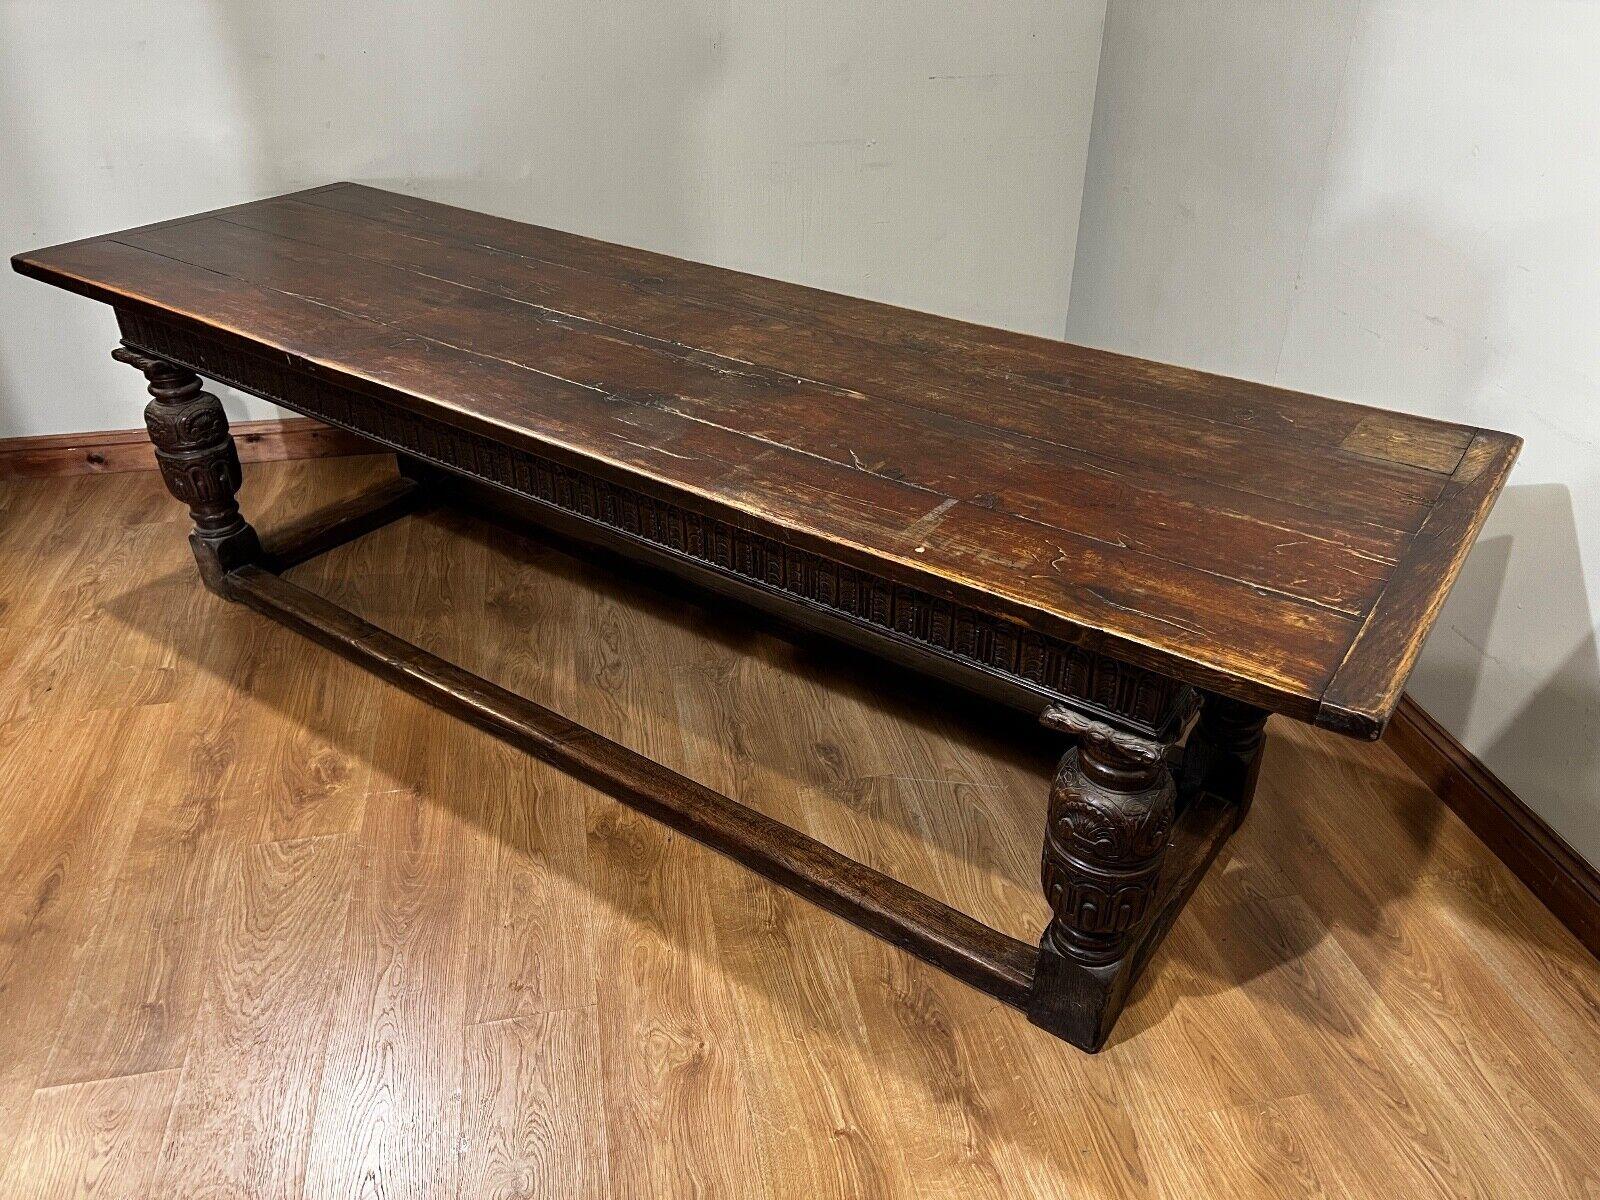 Wonderful antique oak plank top refectory table
Circa 18th century to this work of art
Features bulbous legs with intricate carving
There is further carving around the apron, really skilled crafting
We have various chairs to match so please get